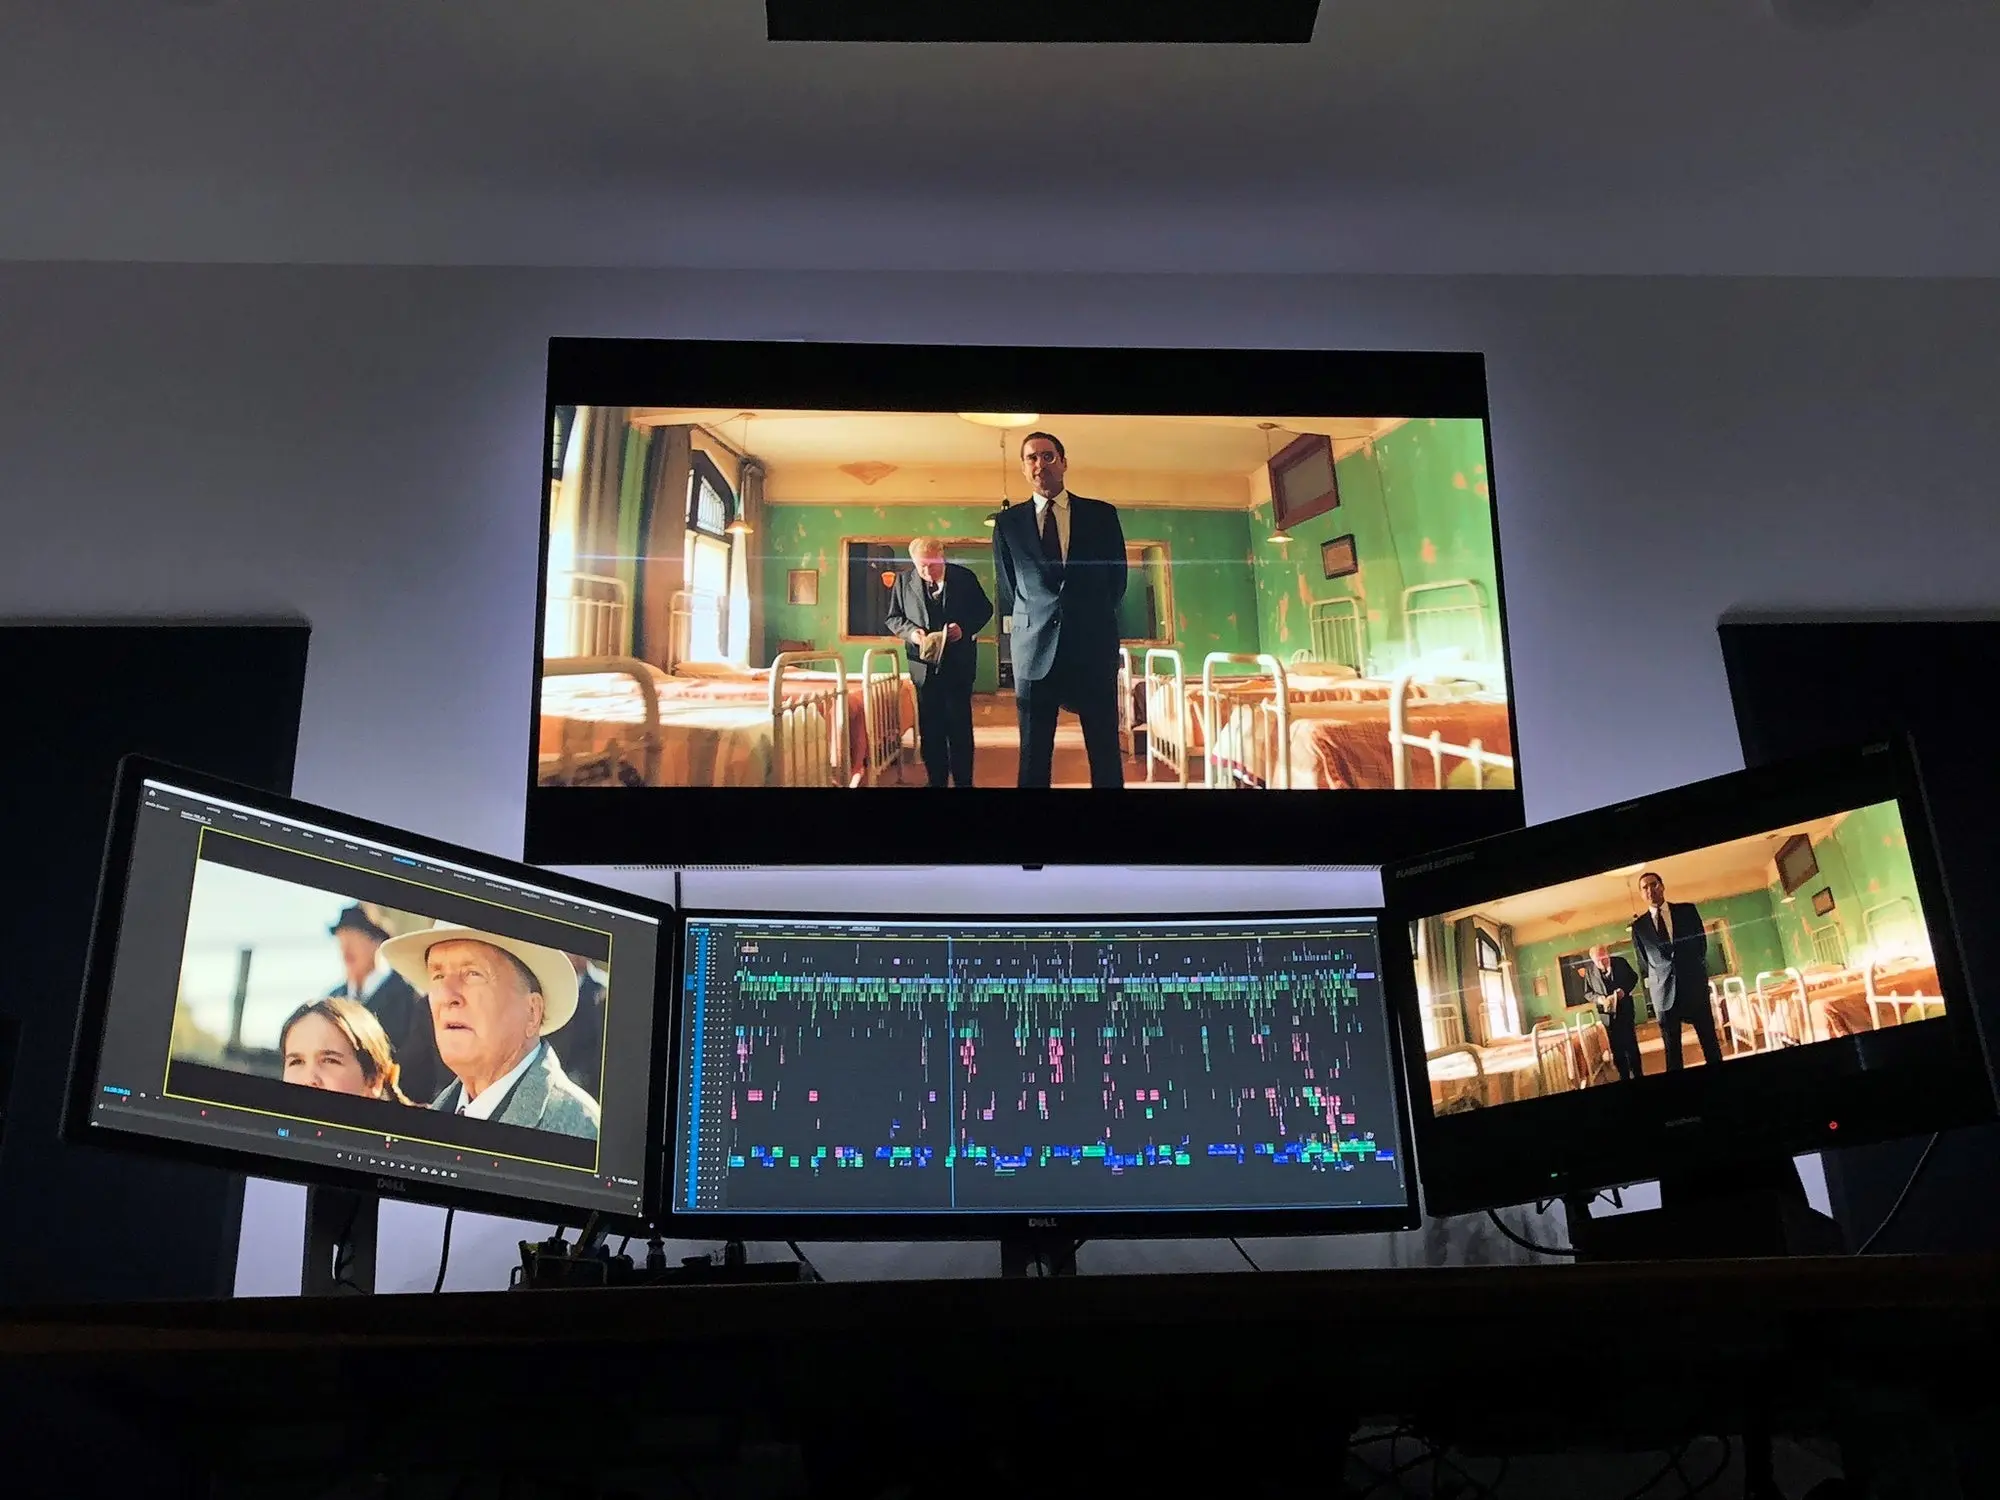 Photo of the movie being edited using Premiere Pro. 